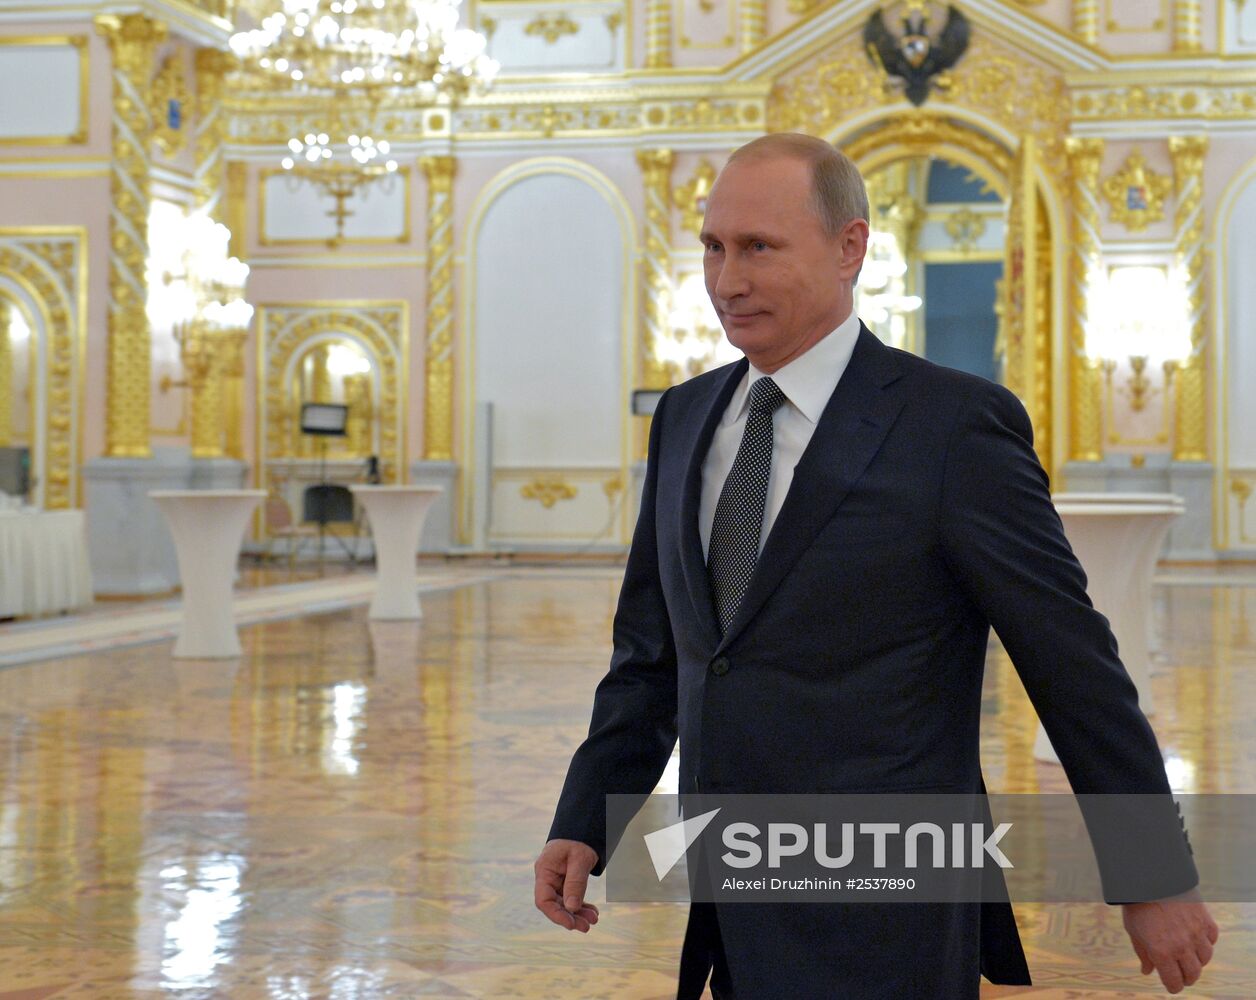 Vladimir Putin delivers annual Presidential Address to Federal Assembly